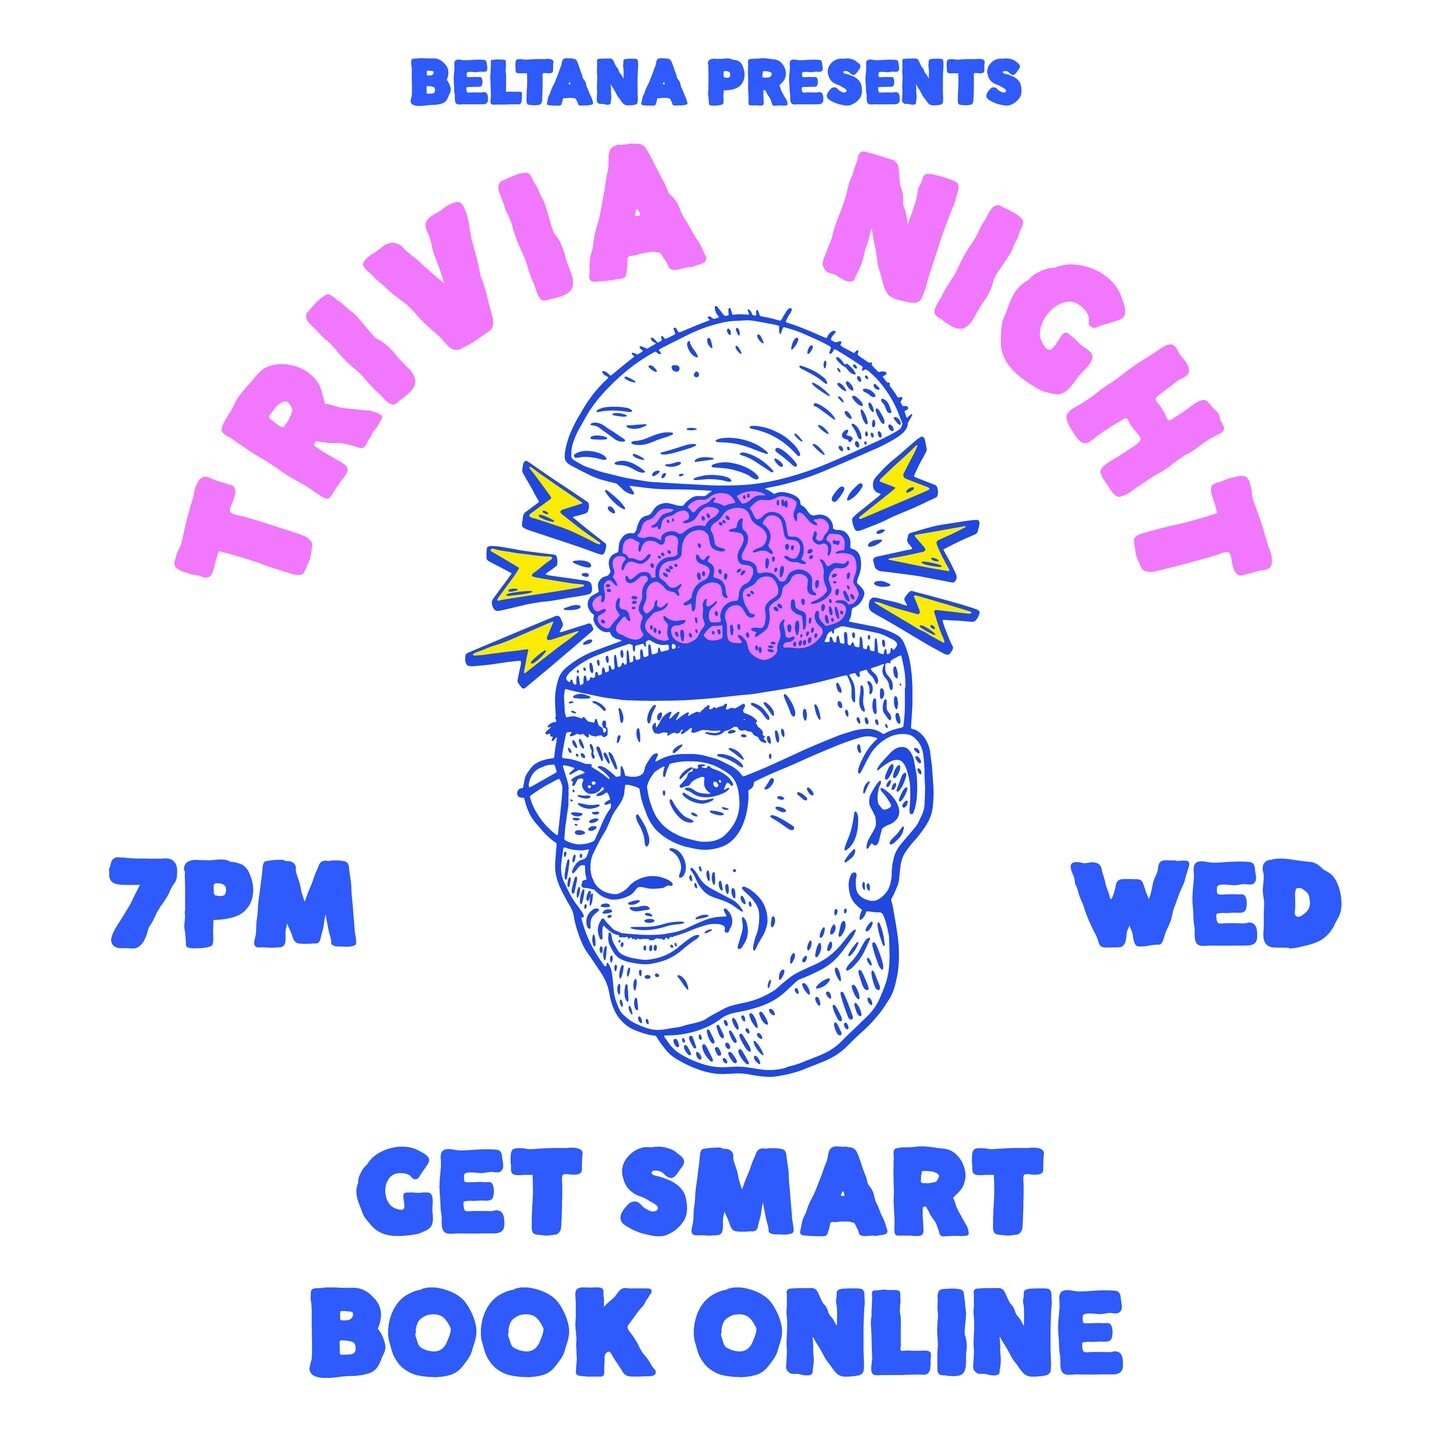 Test your brain &amp; book a table for trivia. Every Wednesday night in our dining room.
#servingtheeast